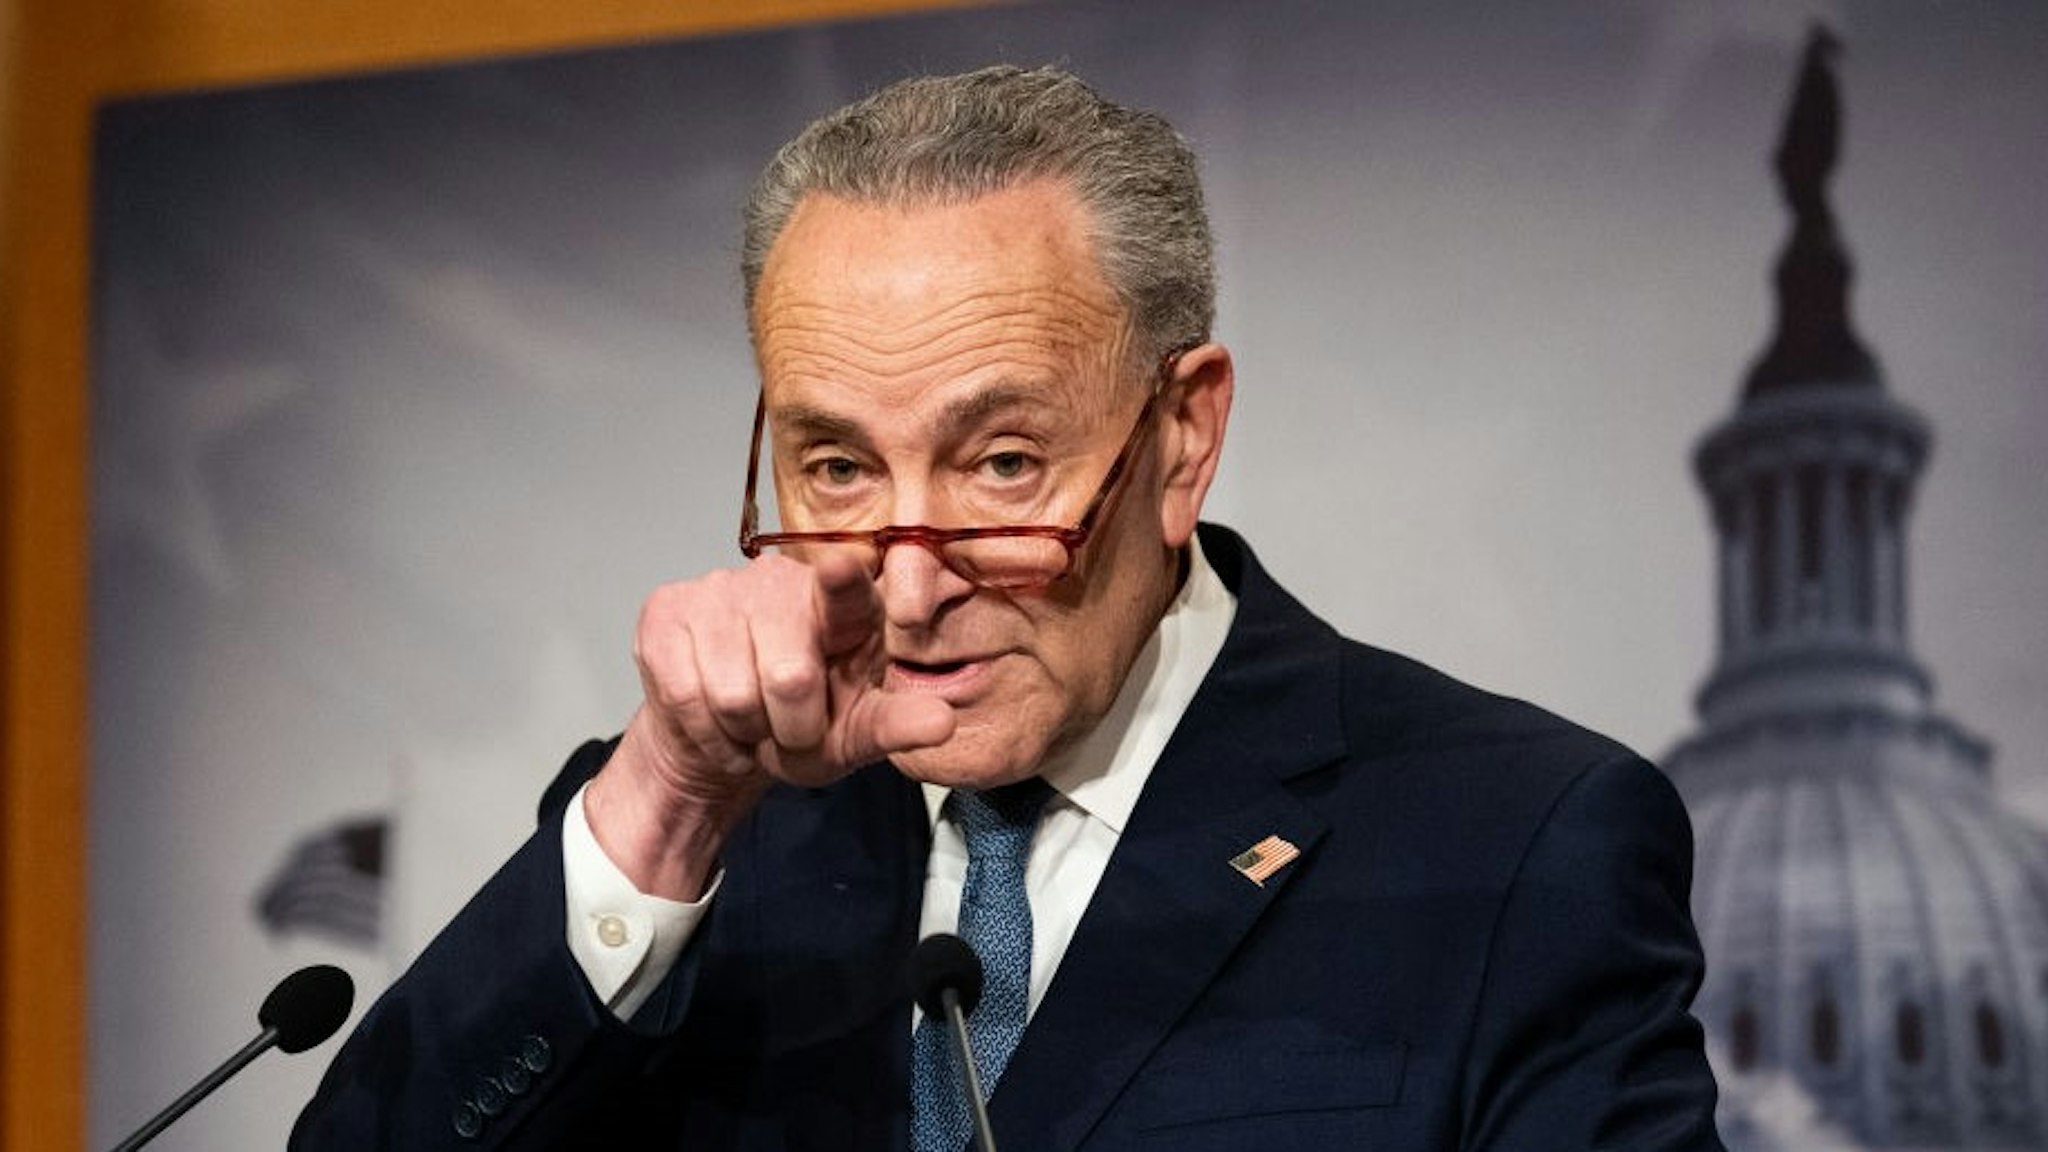 WASHINGTON, UNITED STATES - DECEMBER 16 2019: U.S. Senator Chuck Schumer (D-NY) speaks at a press conference about a proposed structure for the upcoming impeachment trial in Washington, DC.- PHOTOGRAPH BY Michael Brochstein / Echoes Wire/ Barcroft Media